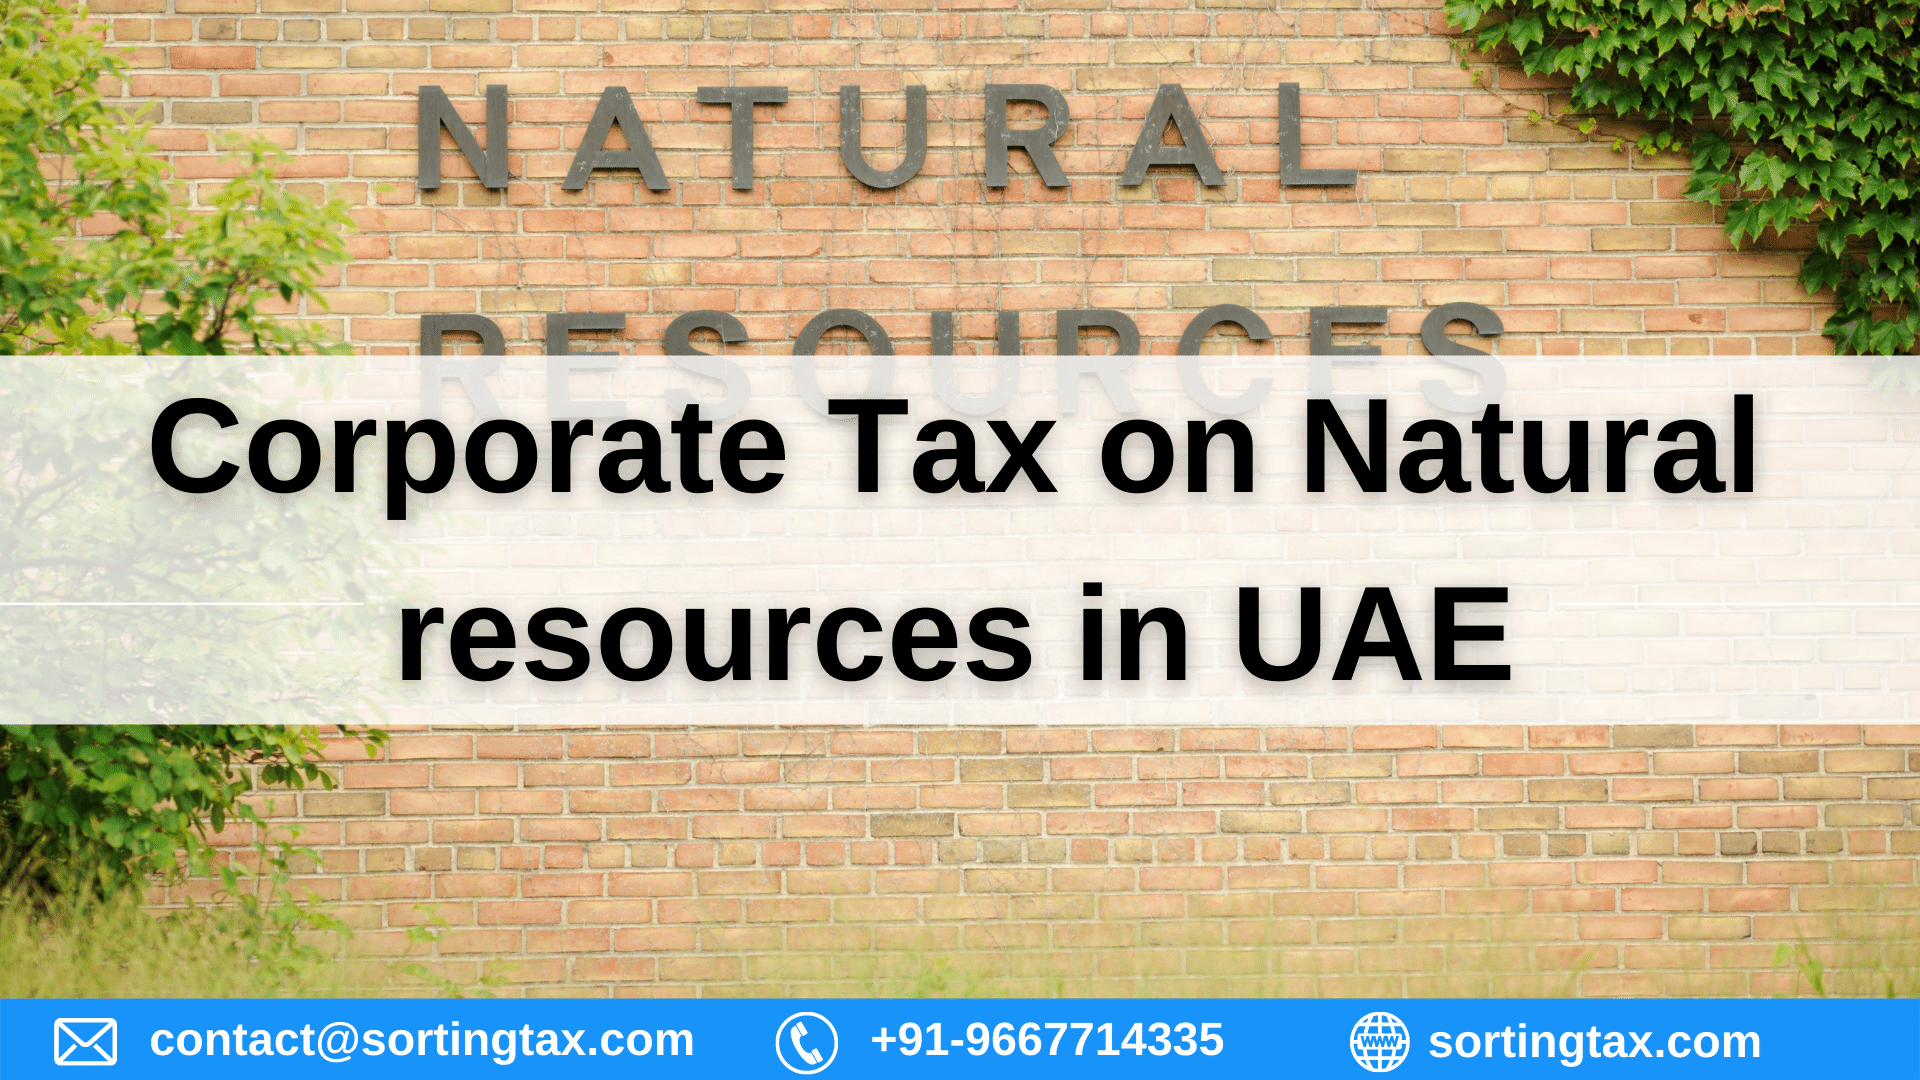 Corporate Tax on Natural resources in UAE